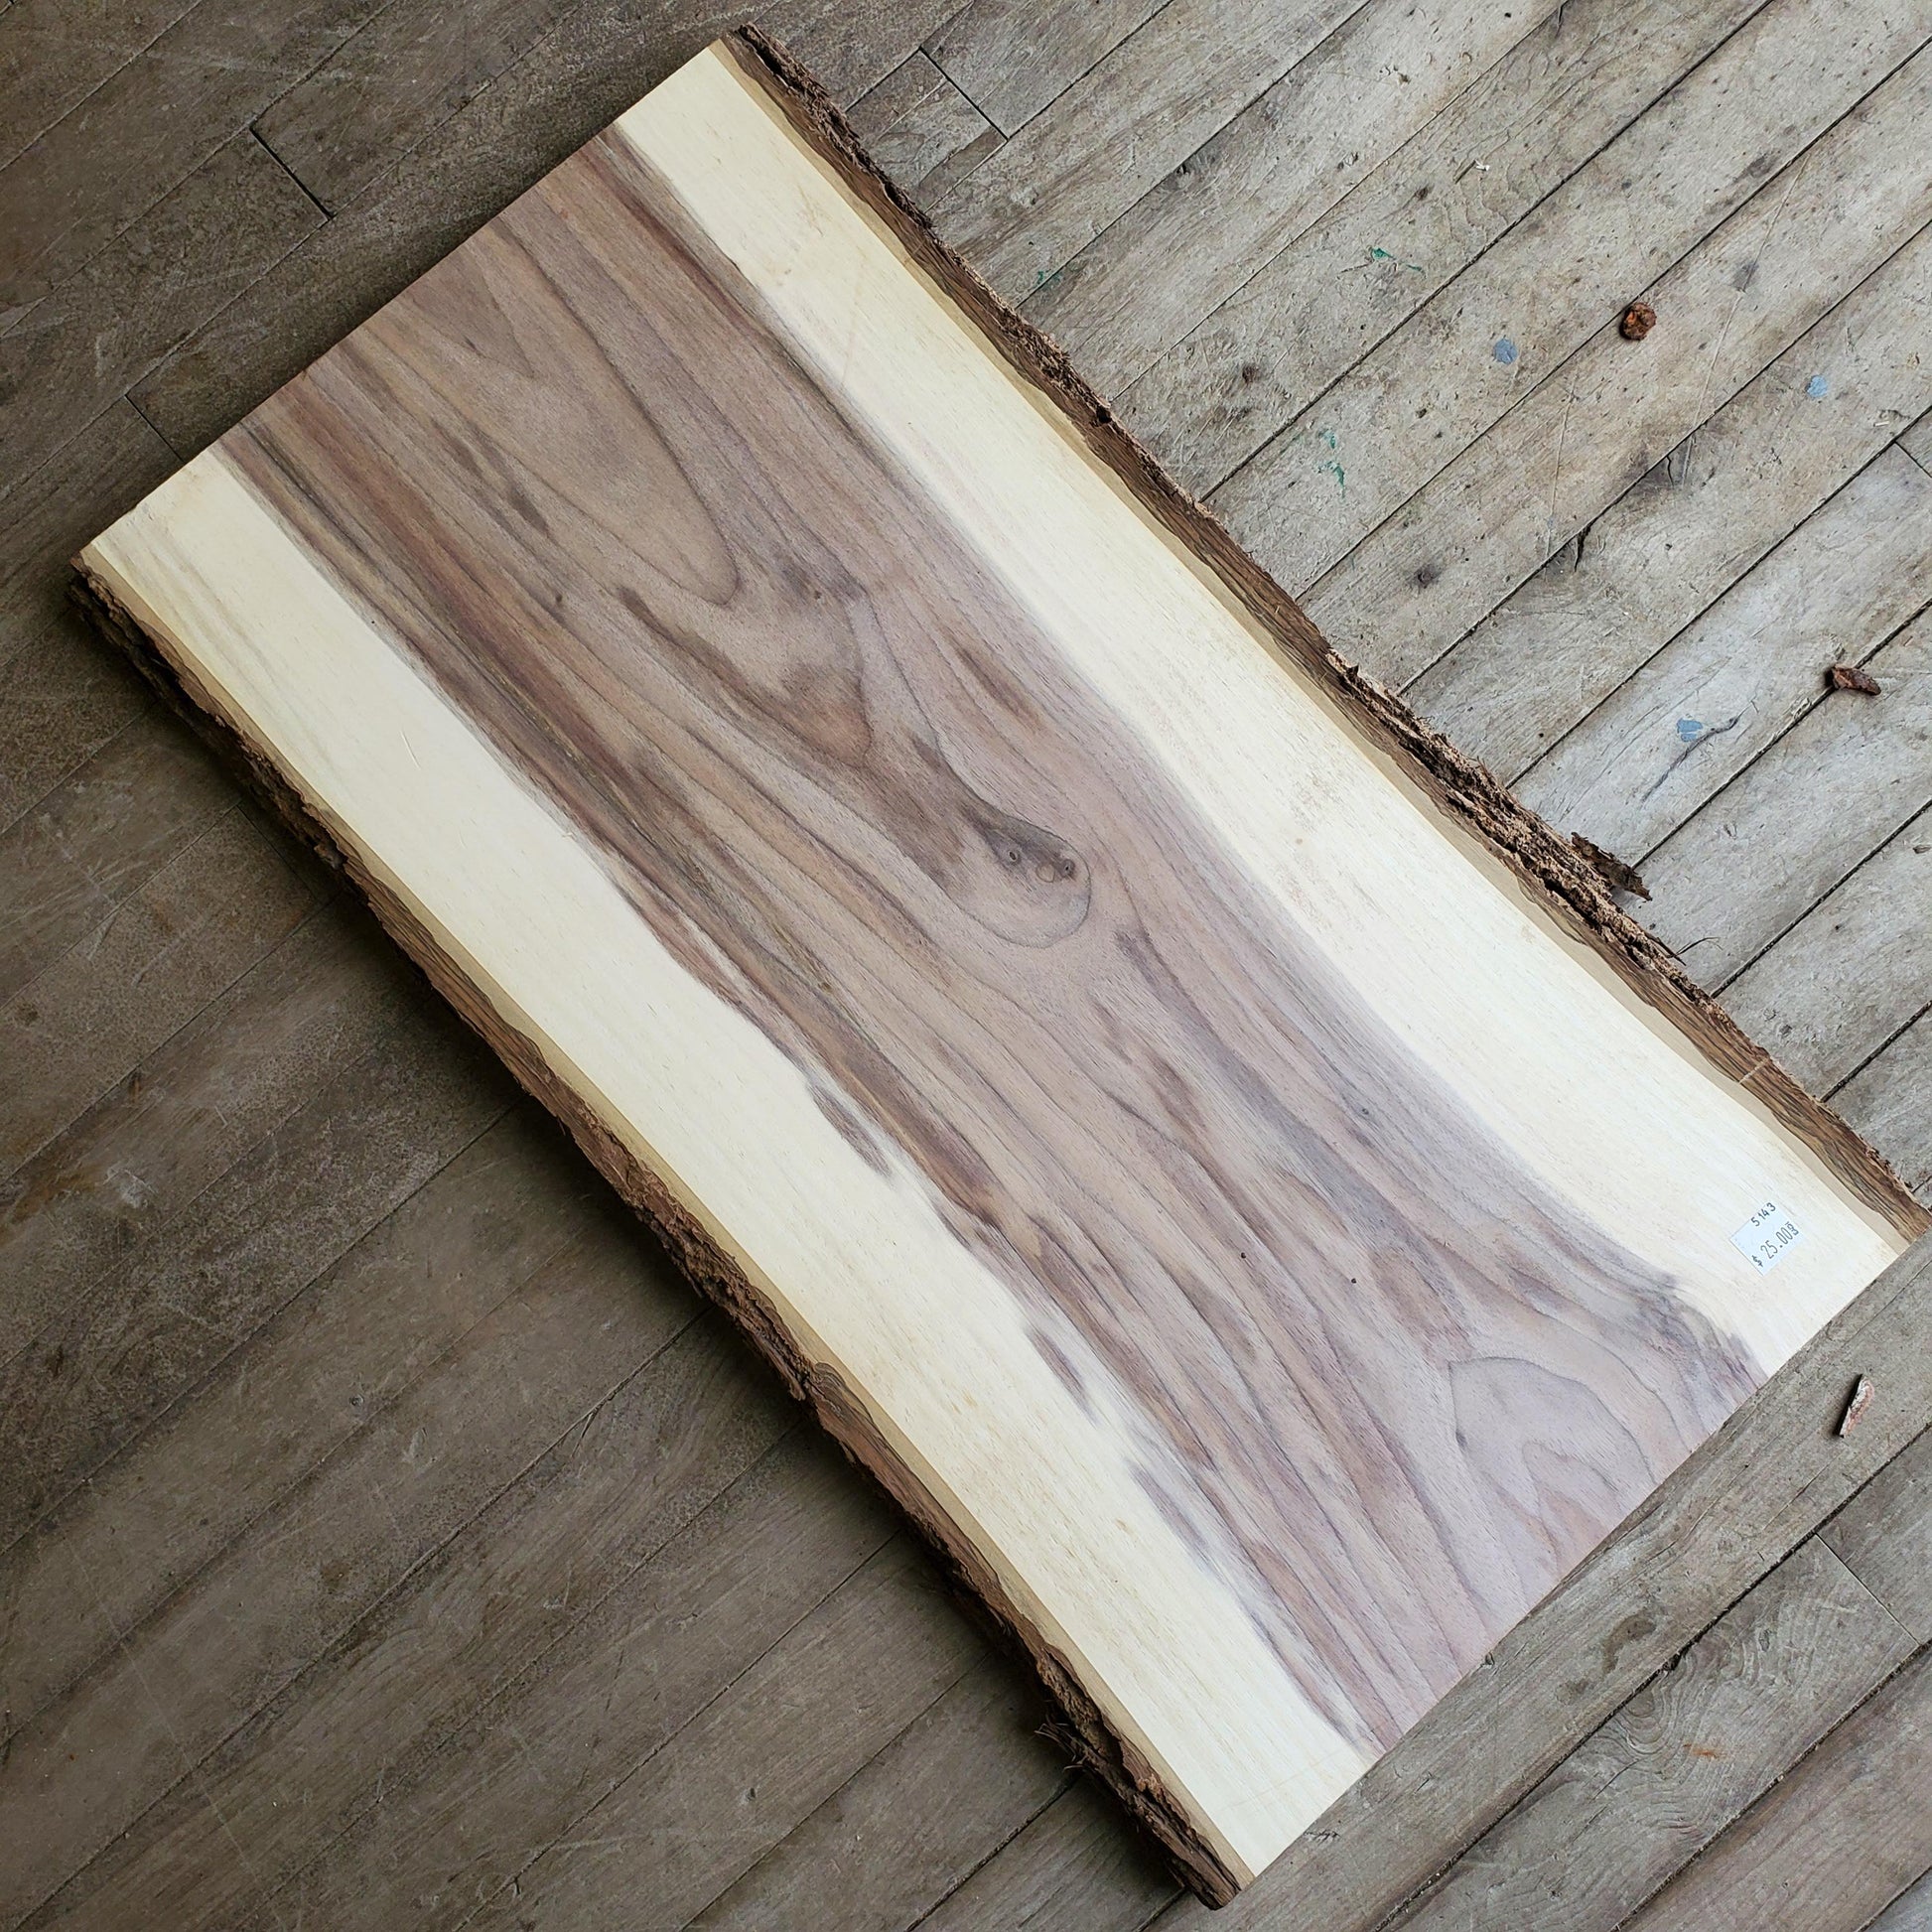 Walnut Live Edge Charcuterie Boards - A&M Wood Specialty